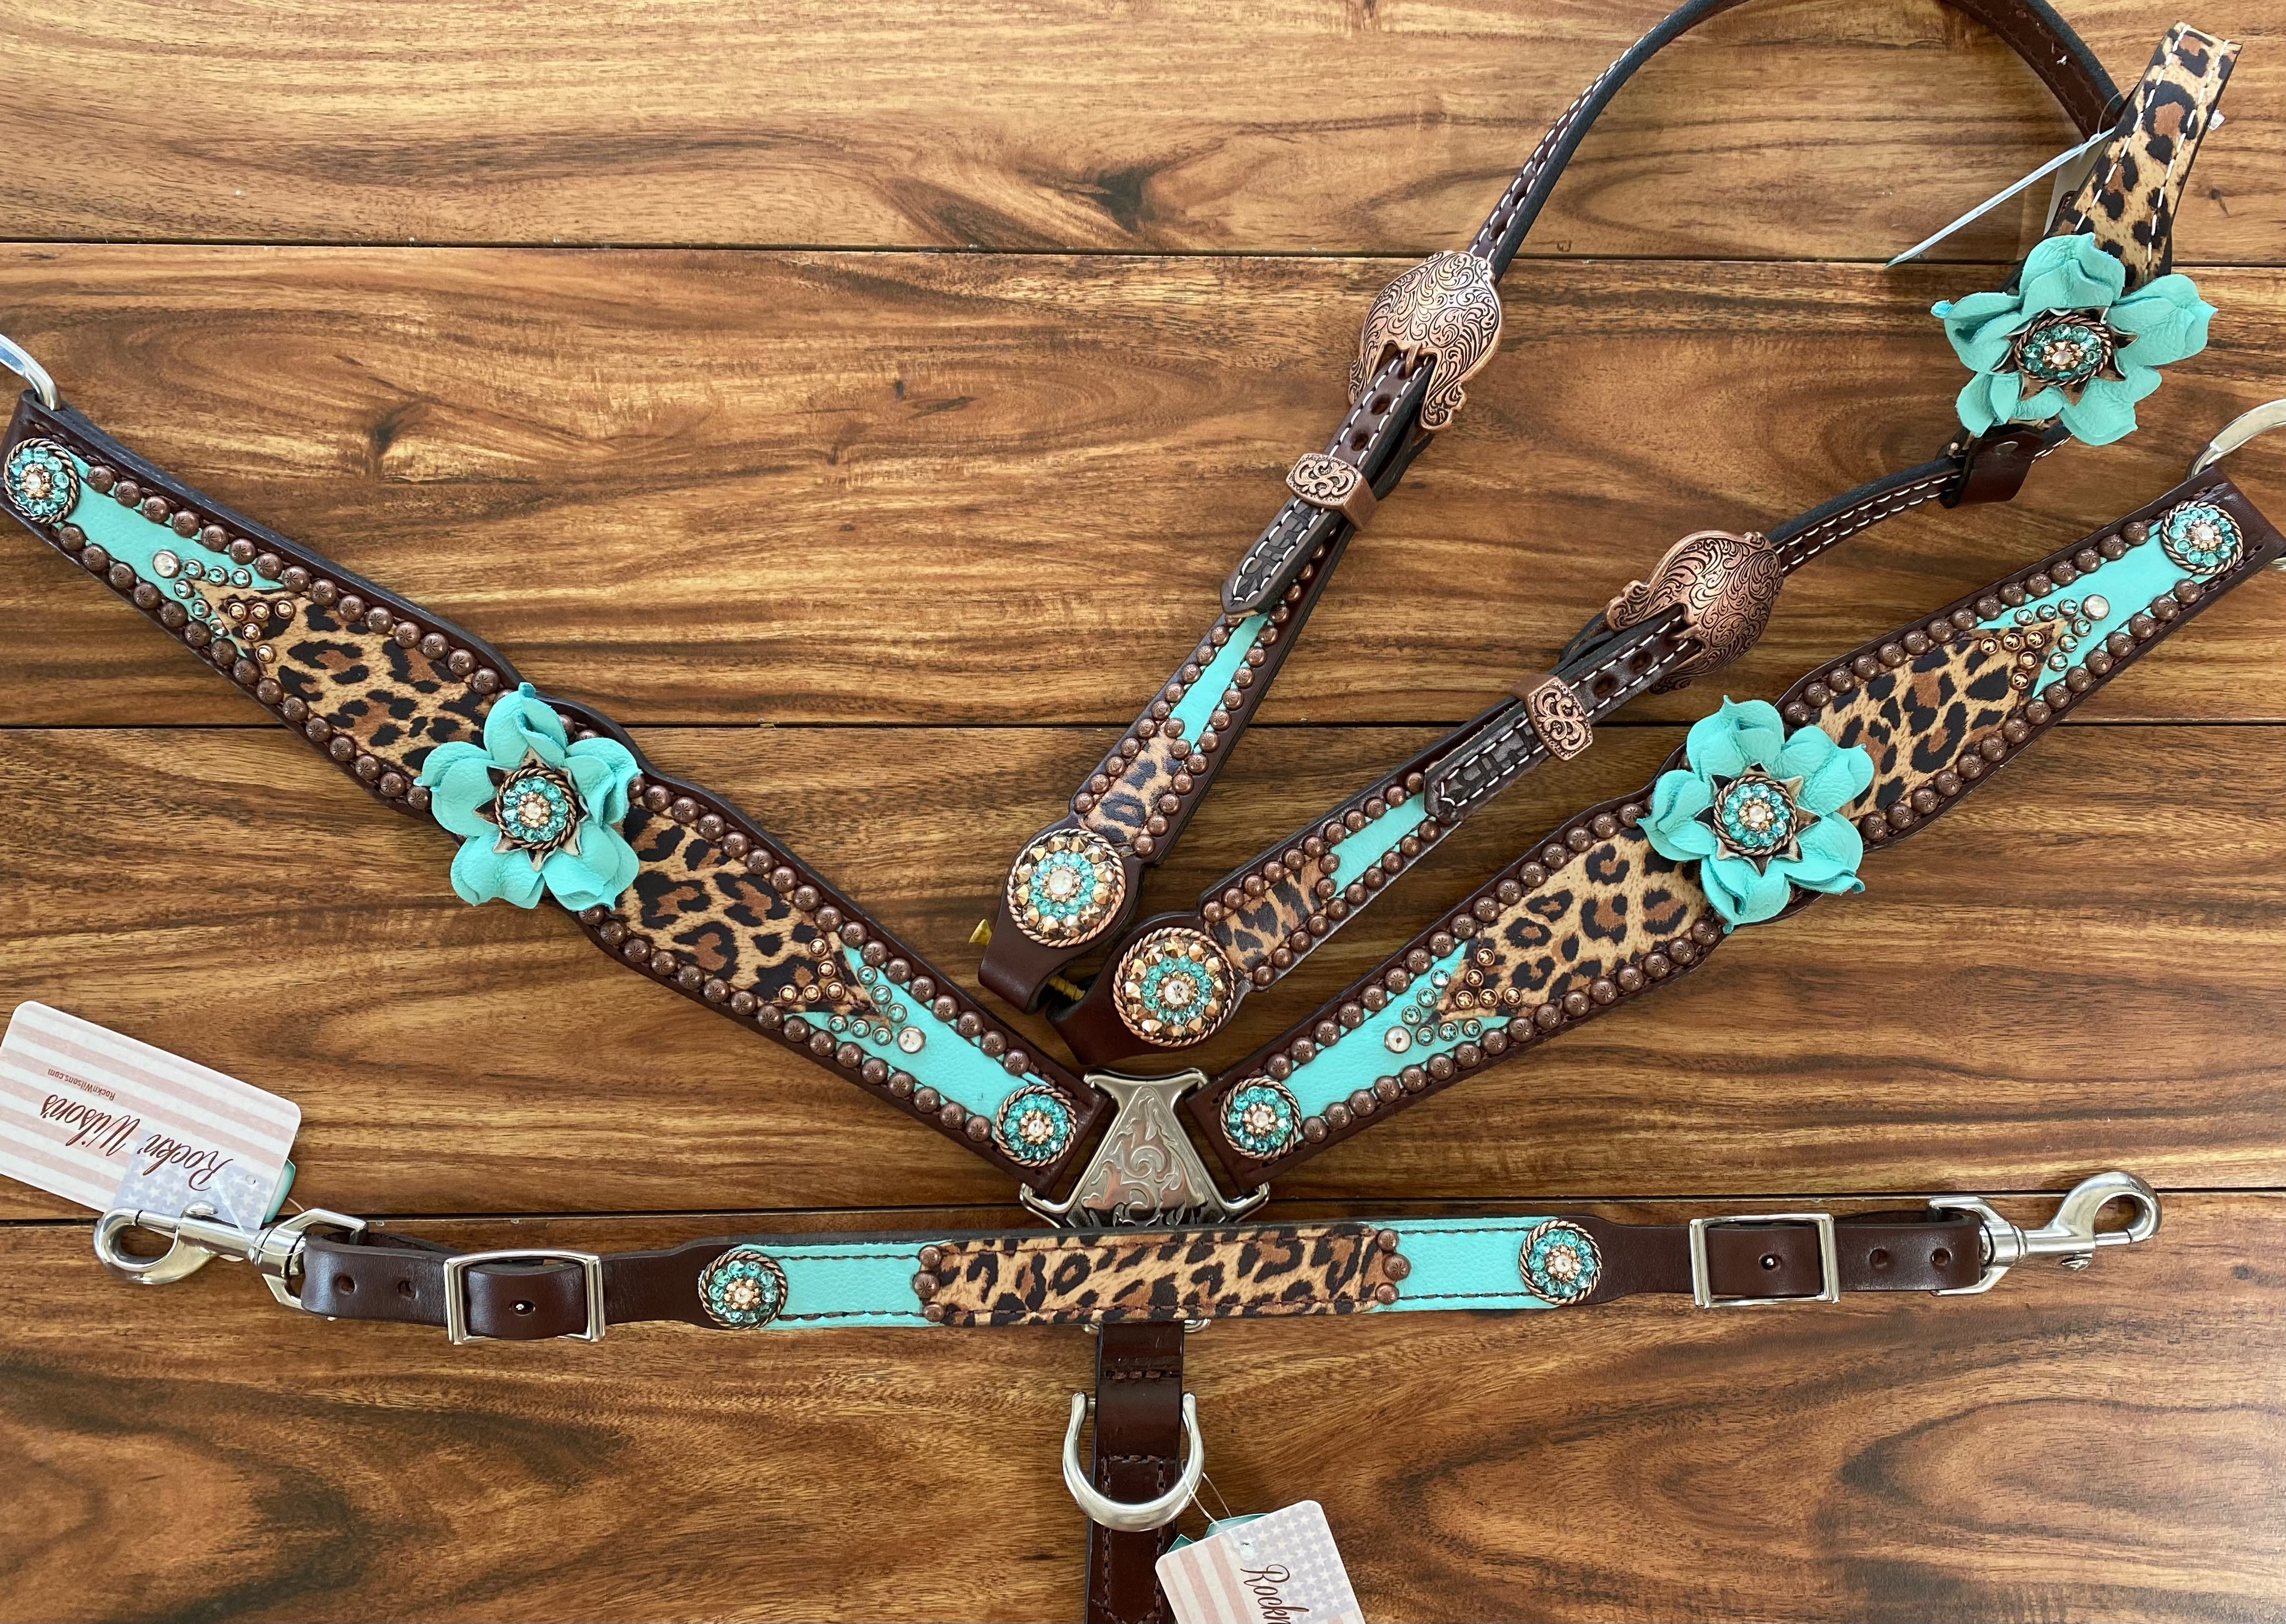 Tiffany Blue and Cheetah with Leather Flower Concho